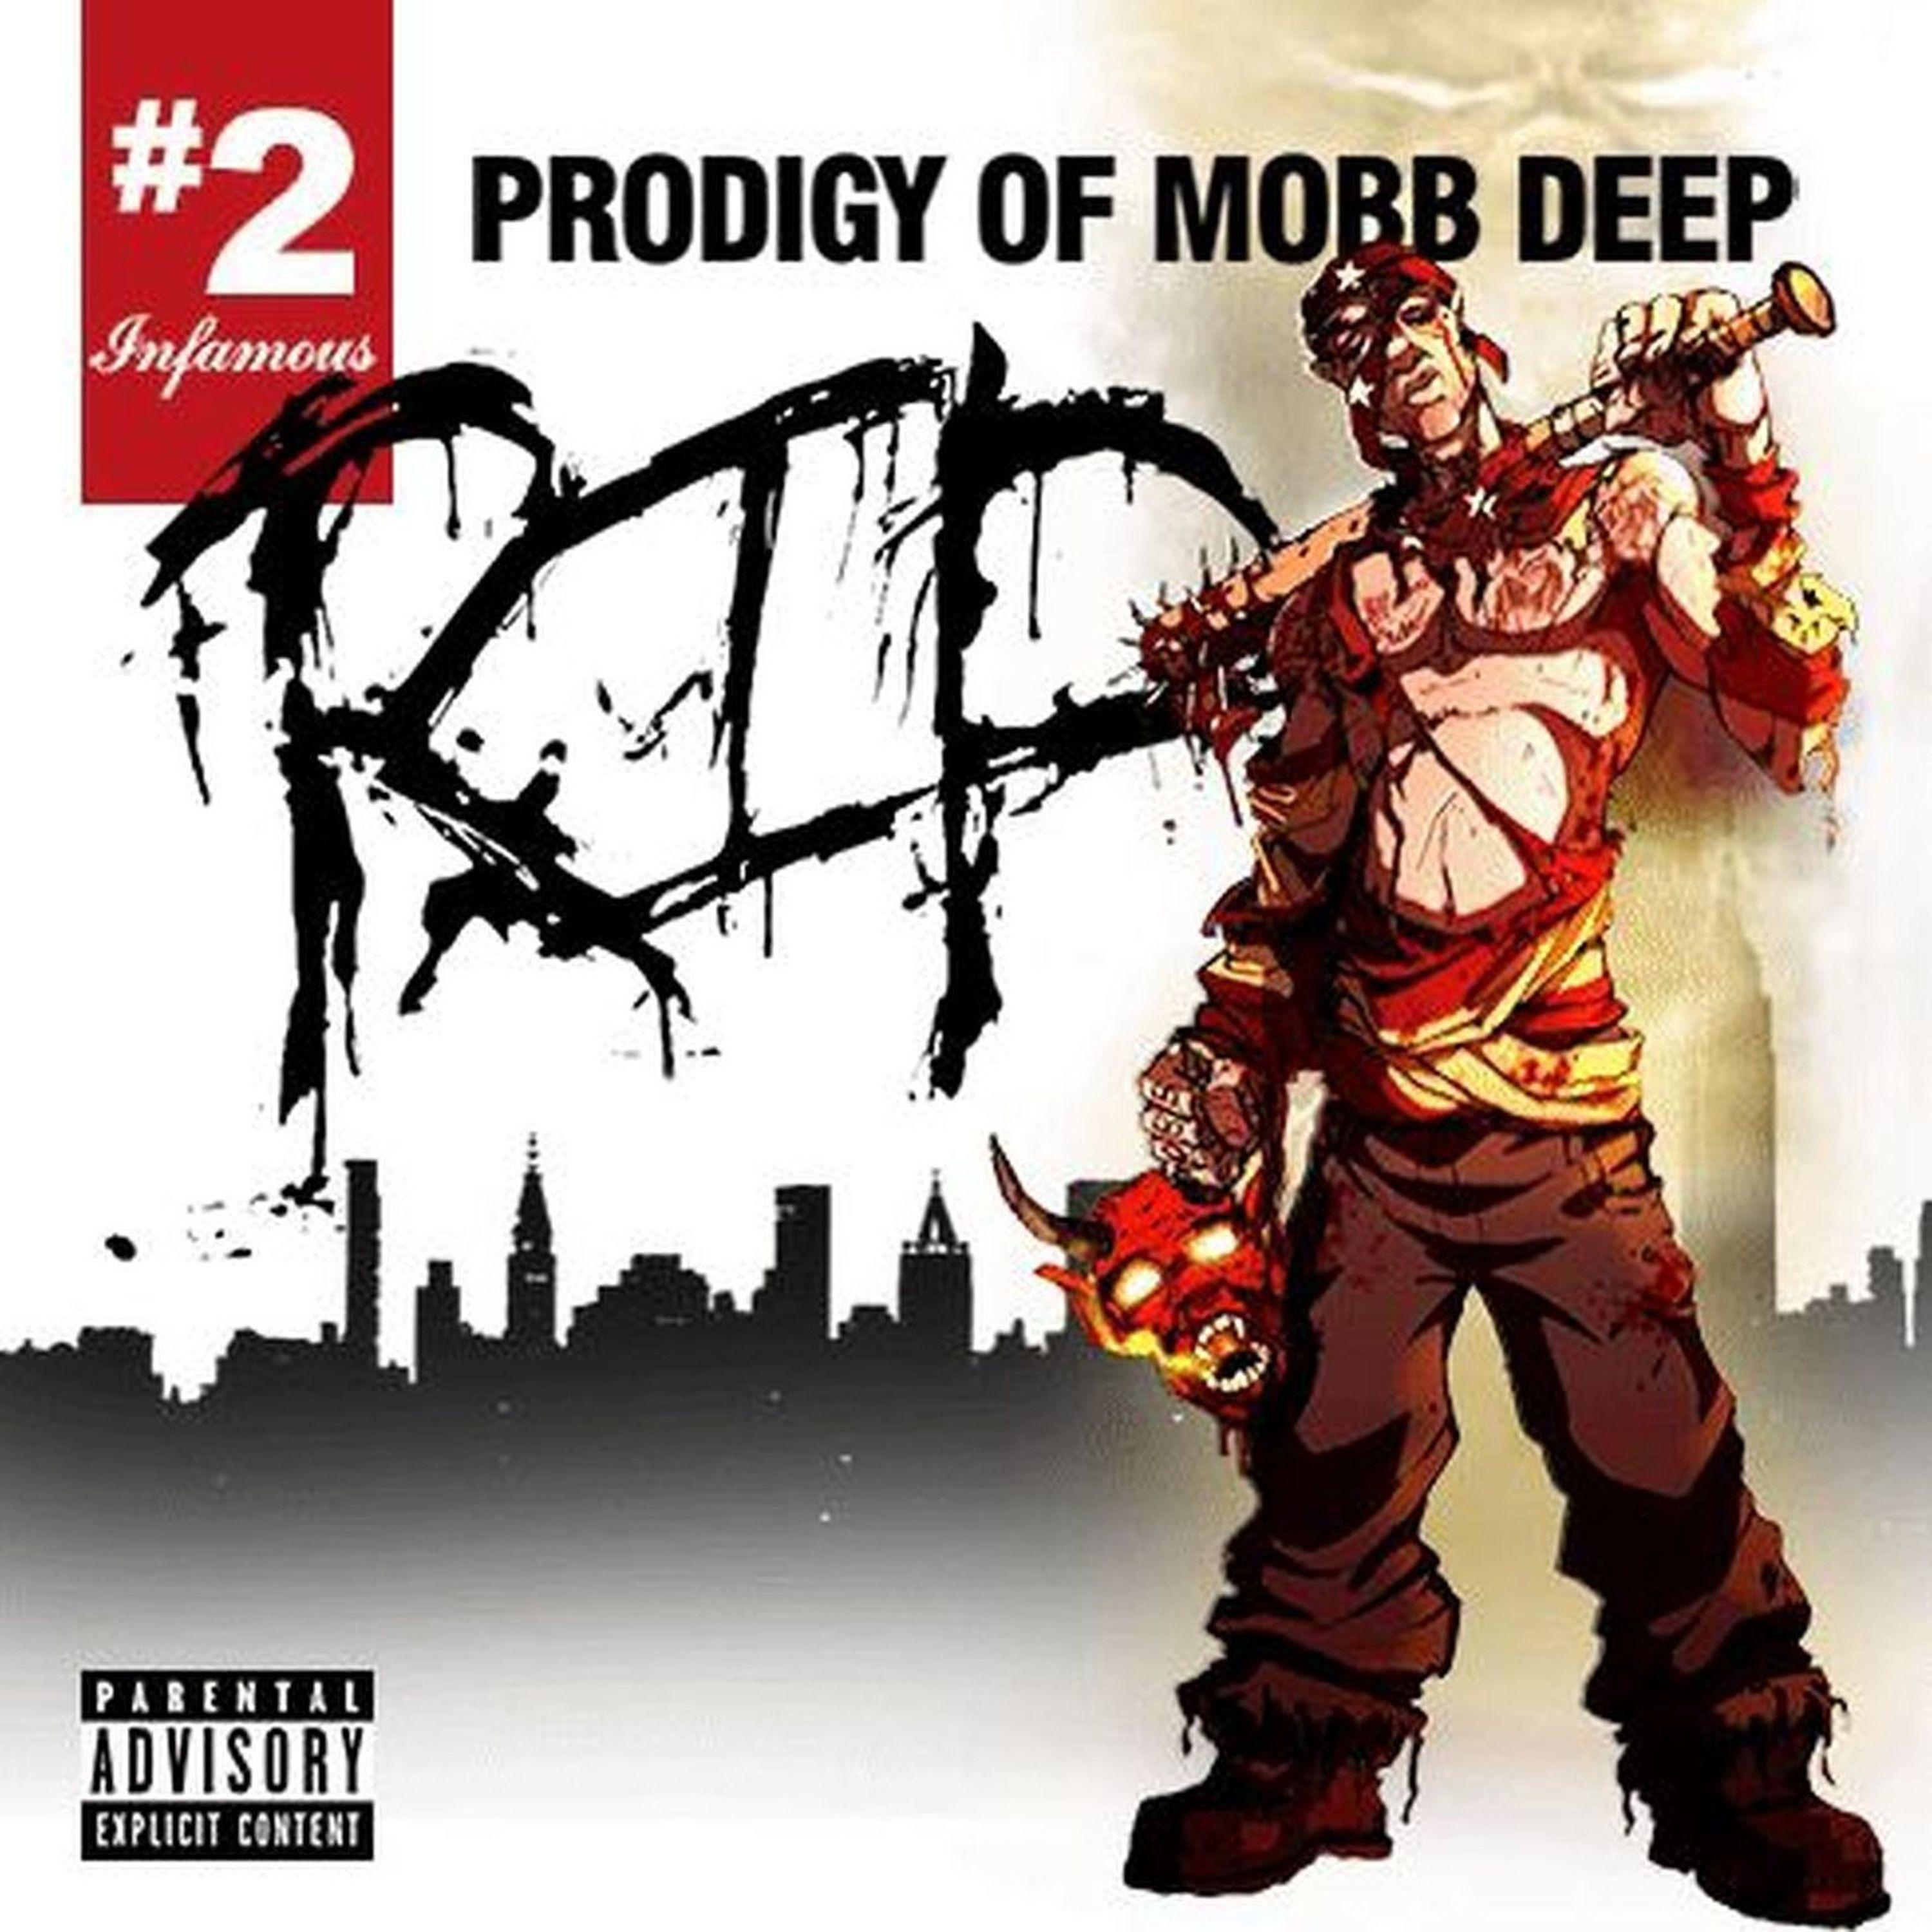 Prodigy of Mobb Deep - Call of Duty (feat. Jay Electronica)